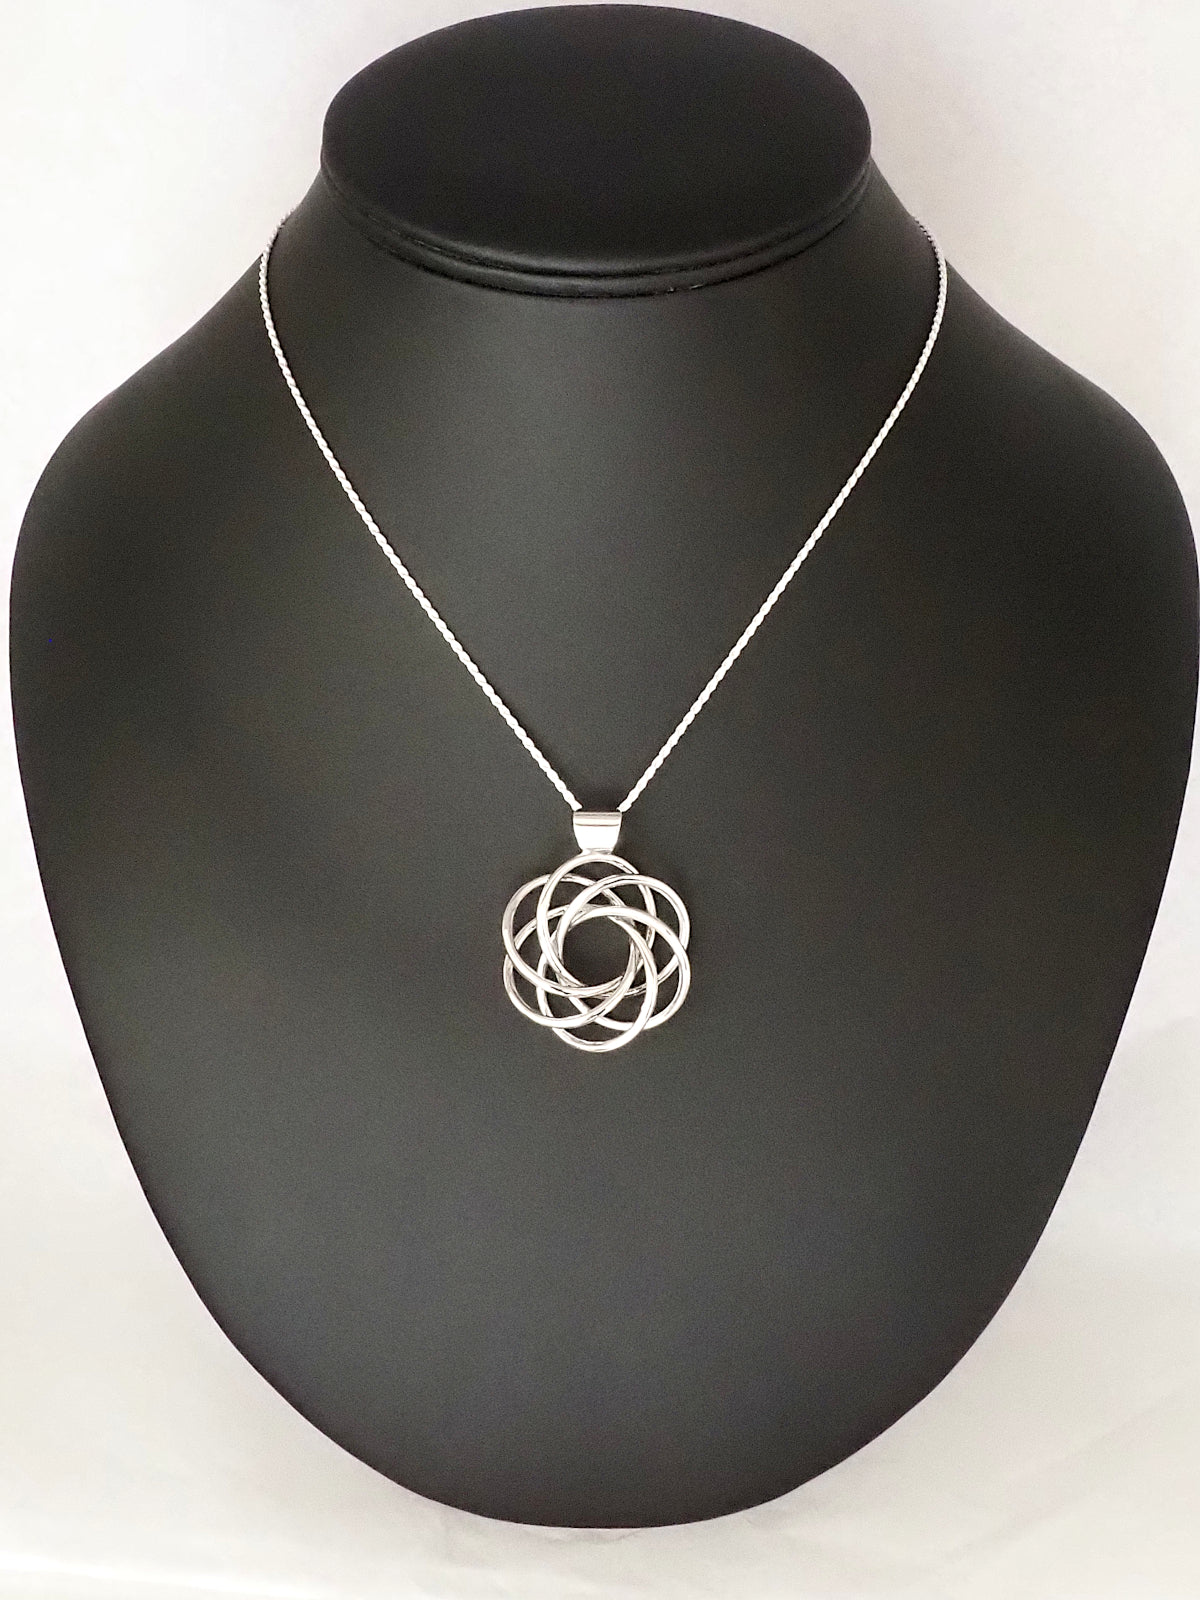 A  rhodium-plated brass pendant in an abstract shape resembling a flower with six petals, with a silver French rope chain, on a necklace display.